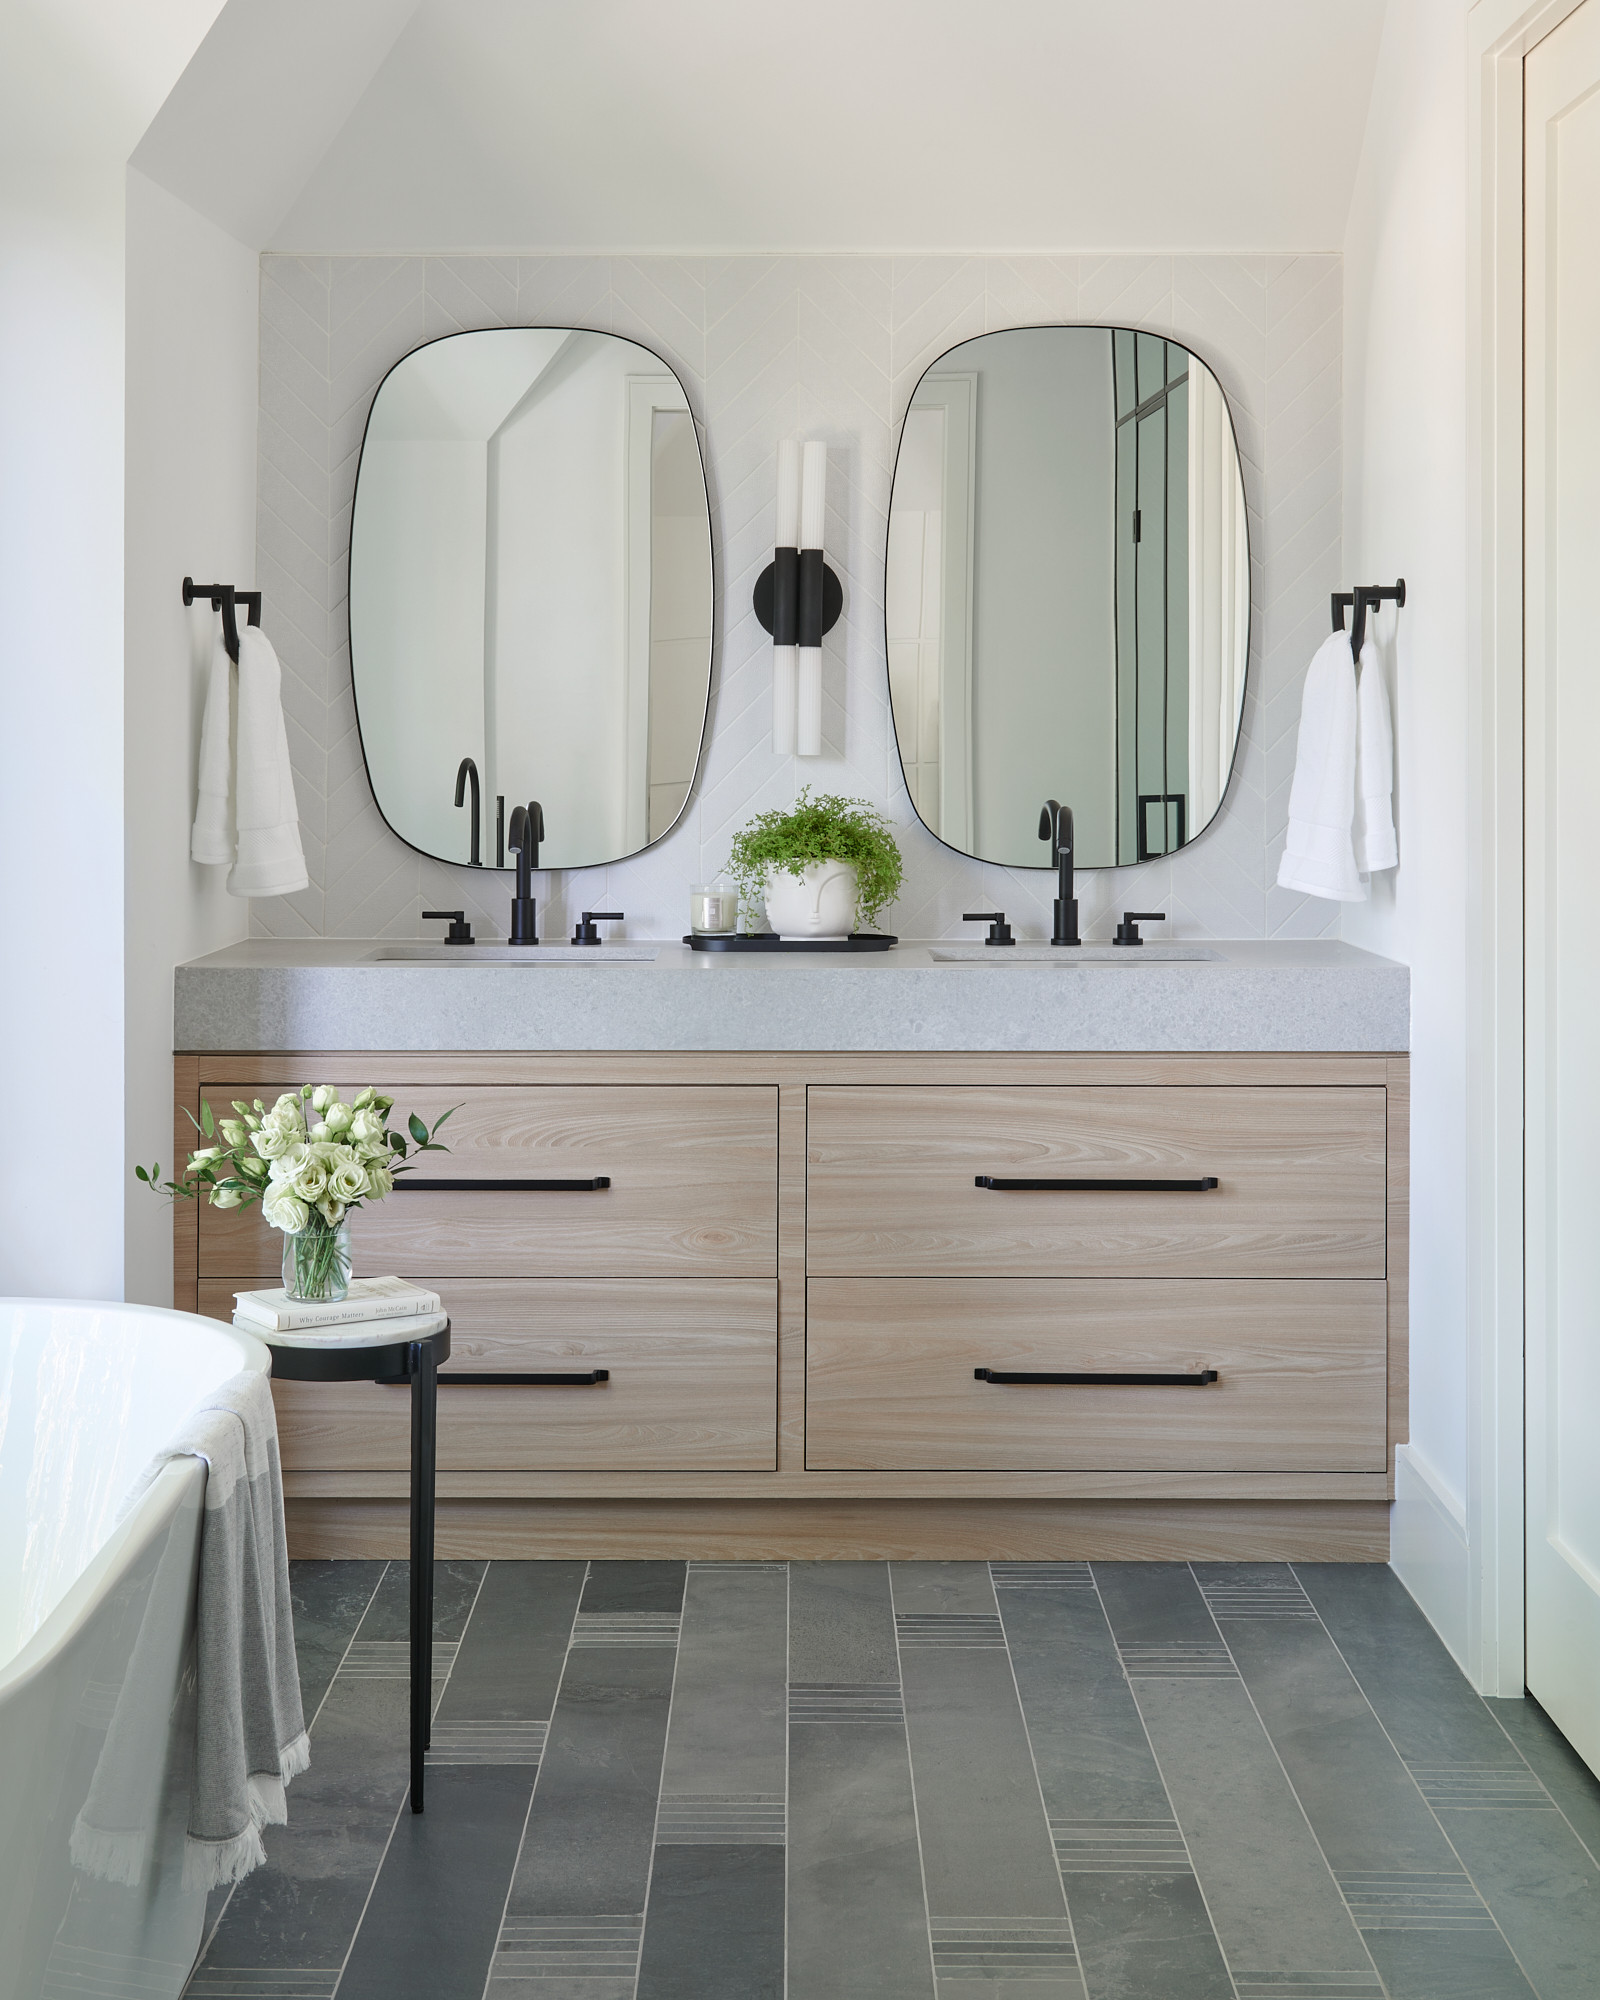 Bathroom Counter Décor Ideas: Transcending Aesthetics and Functionality -  Flooring Outlet & More